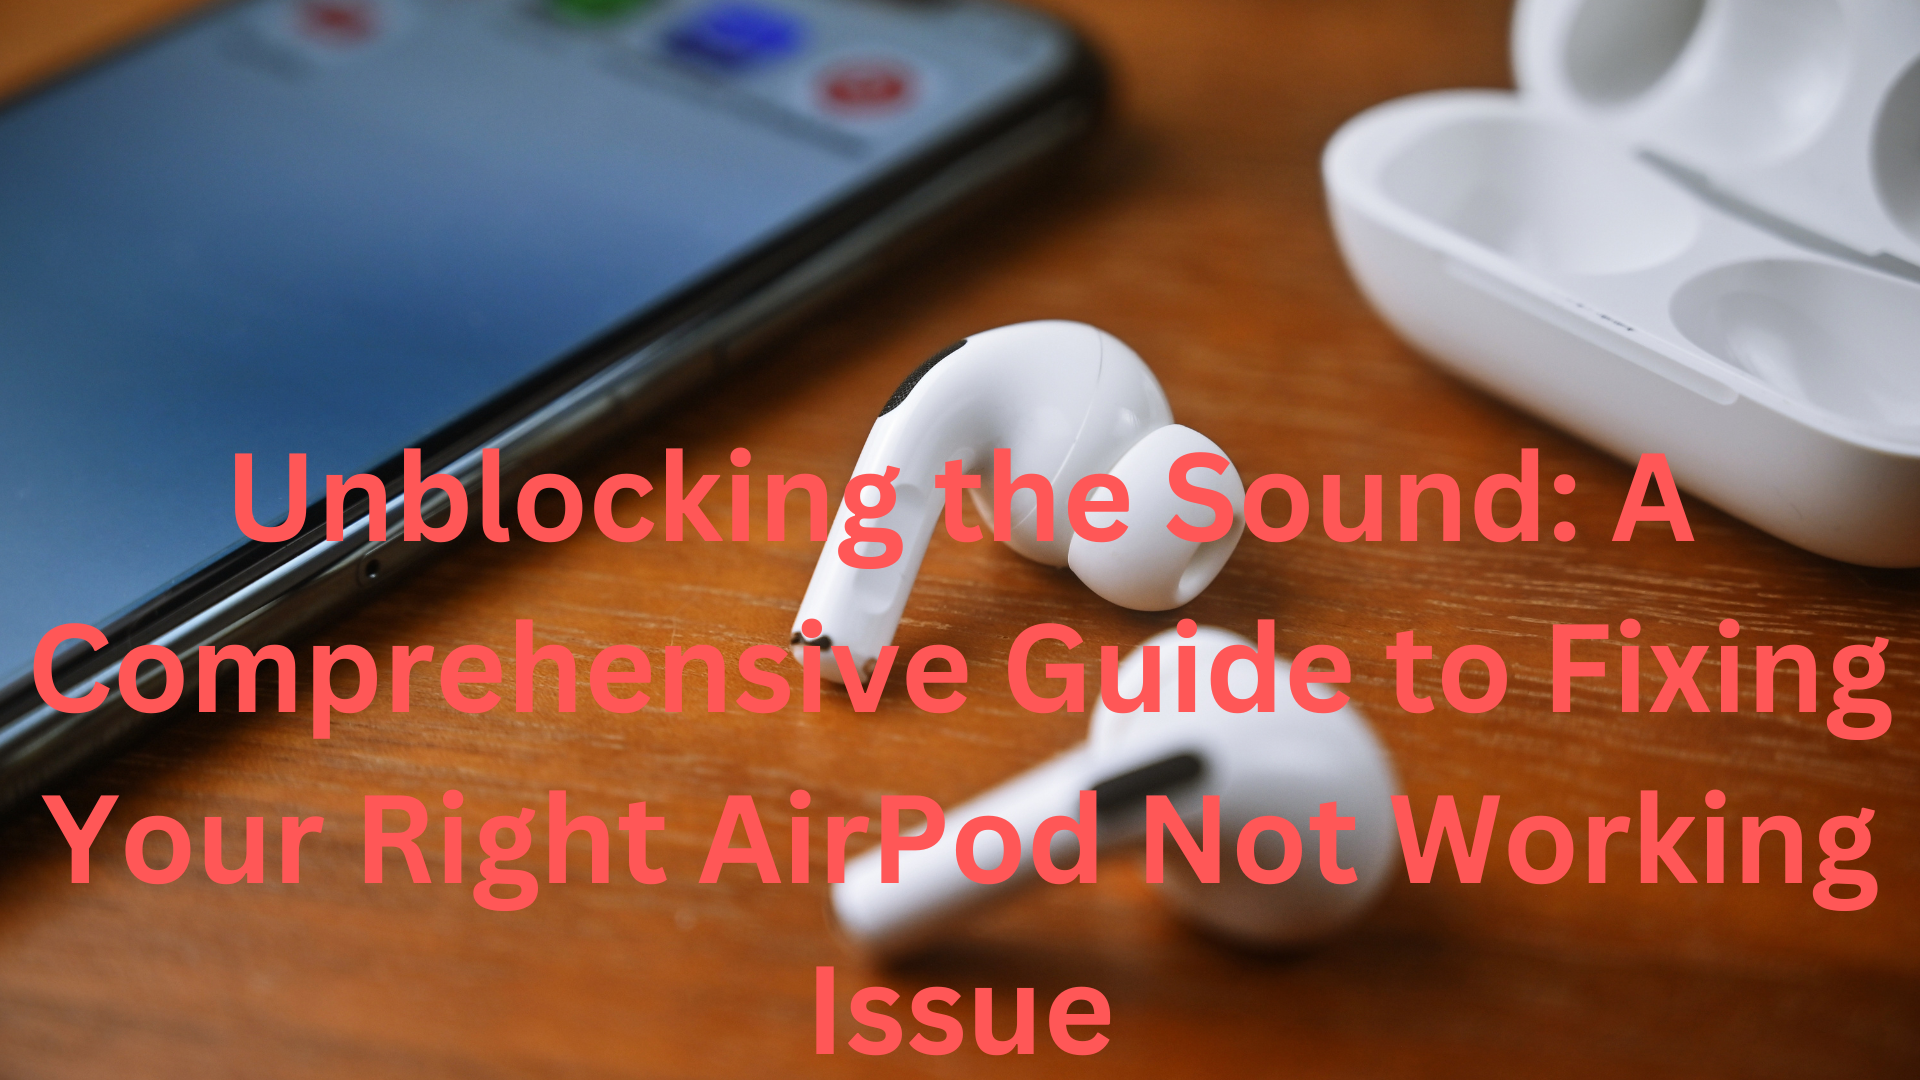 Unblocking the Sound A Comprehensive Guide to Fixing Your Right AirPod Not Working Issue